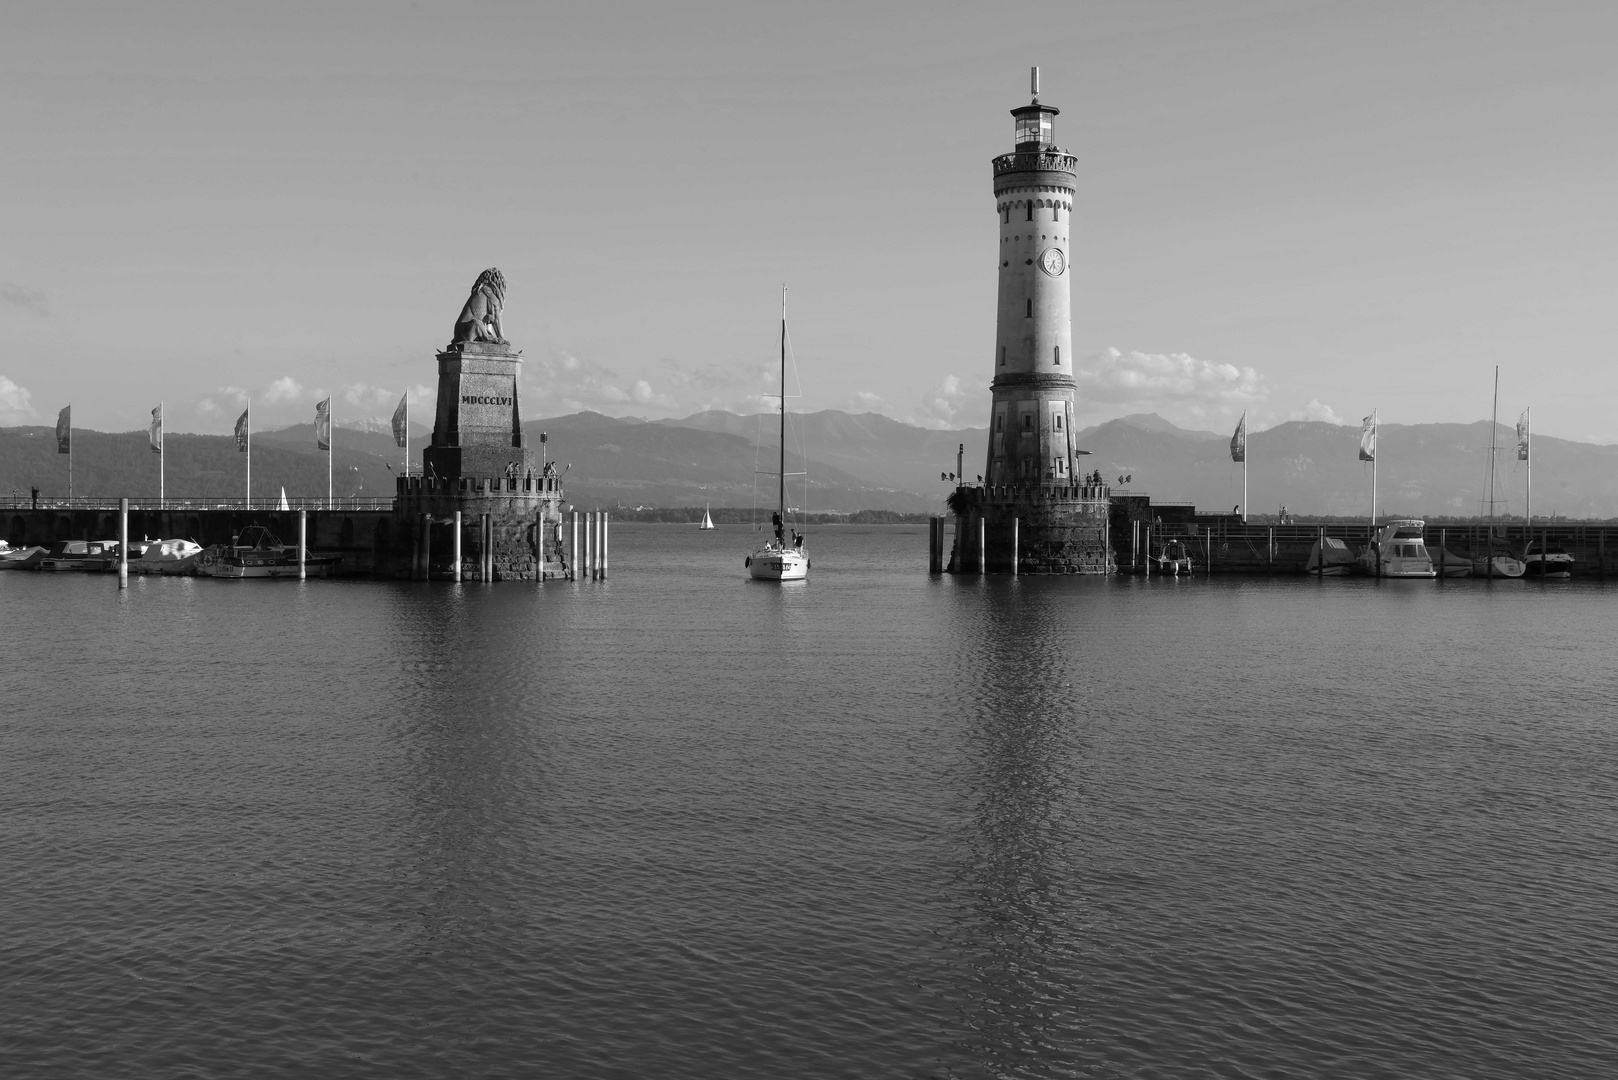 ...Bodensee